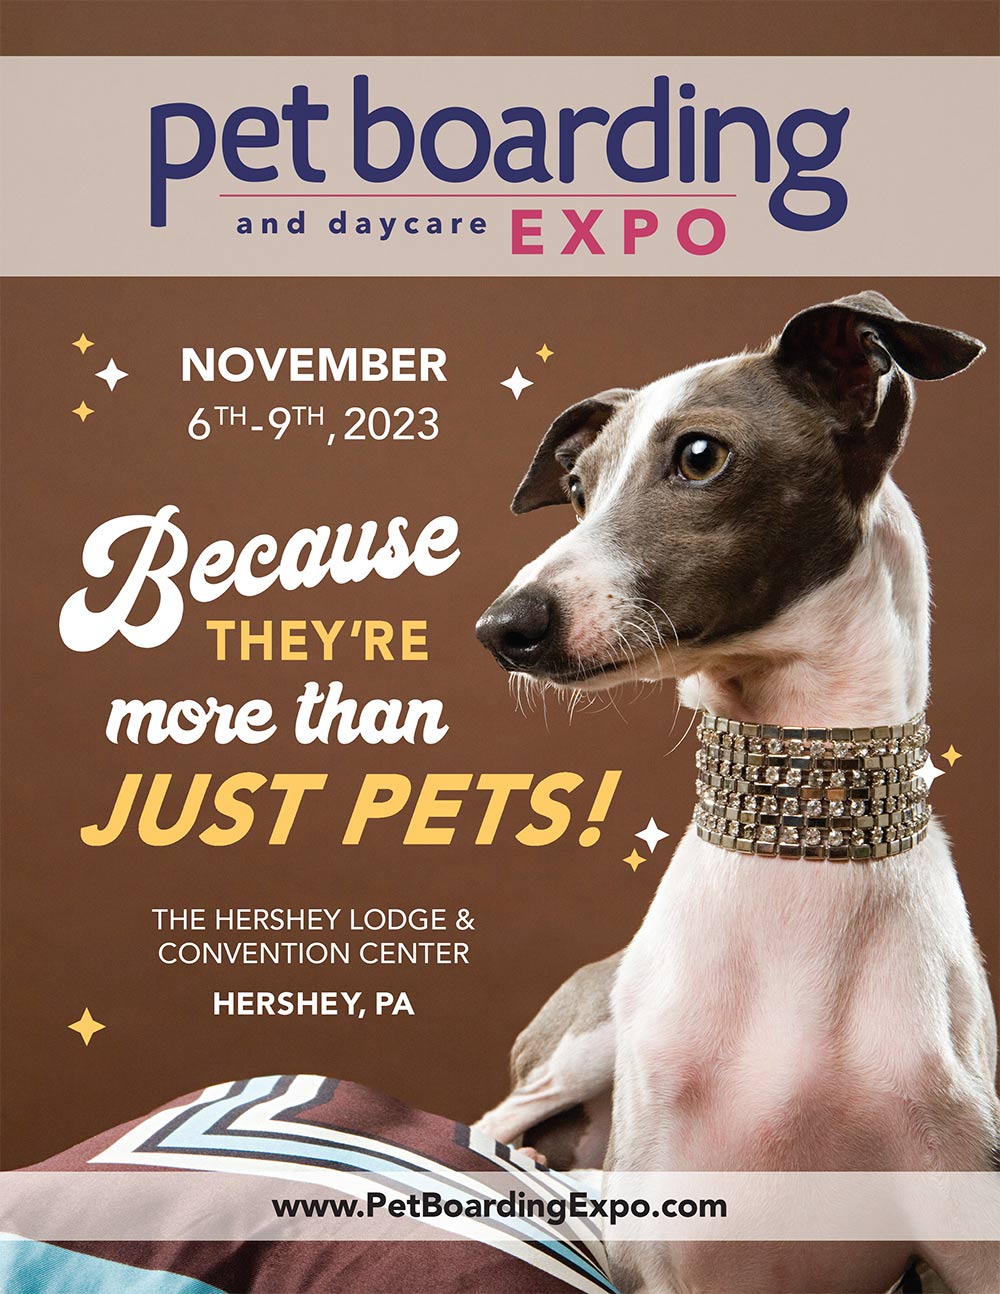 Pet Boarding and Daycare Expo Advertisement